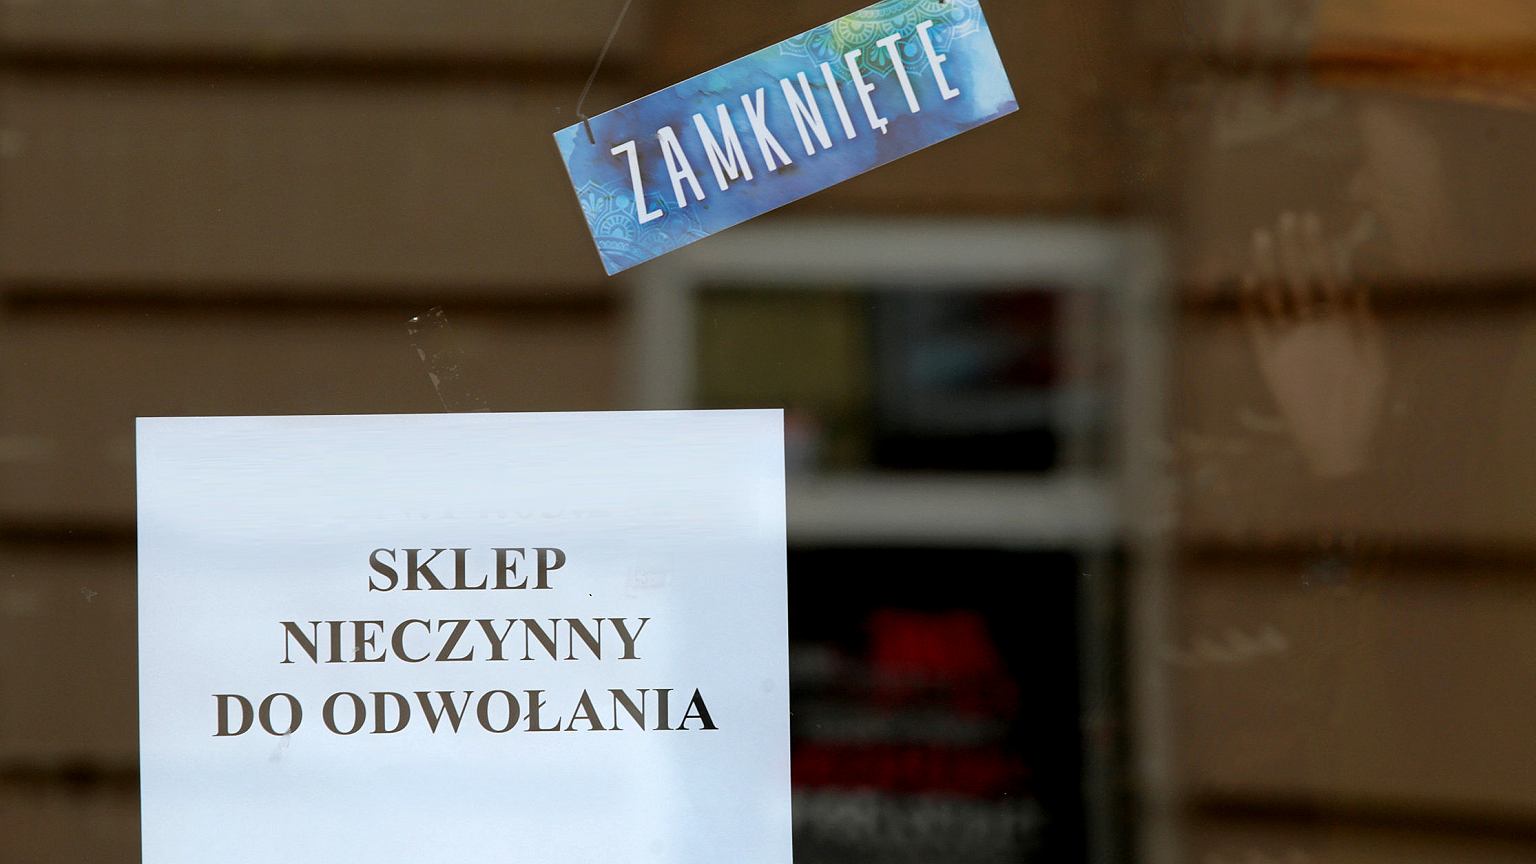 Polish business is no longer fighting?  More than 200,000 companies have closed or suspended their activities.